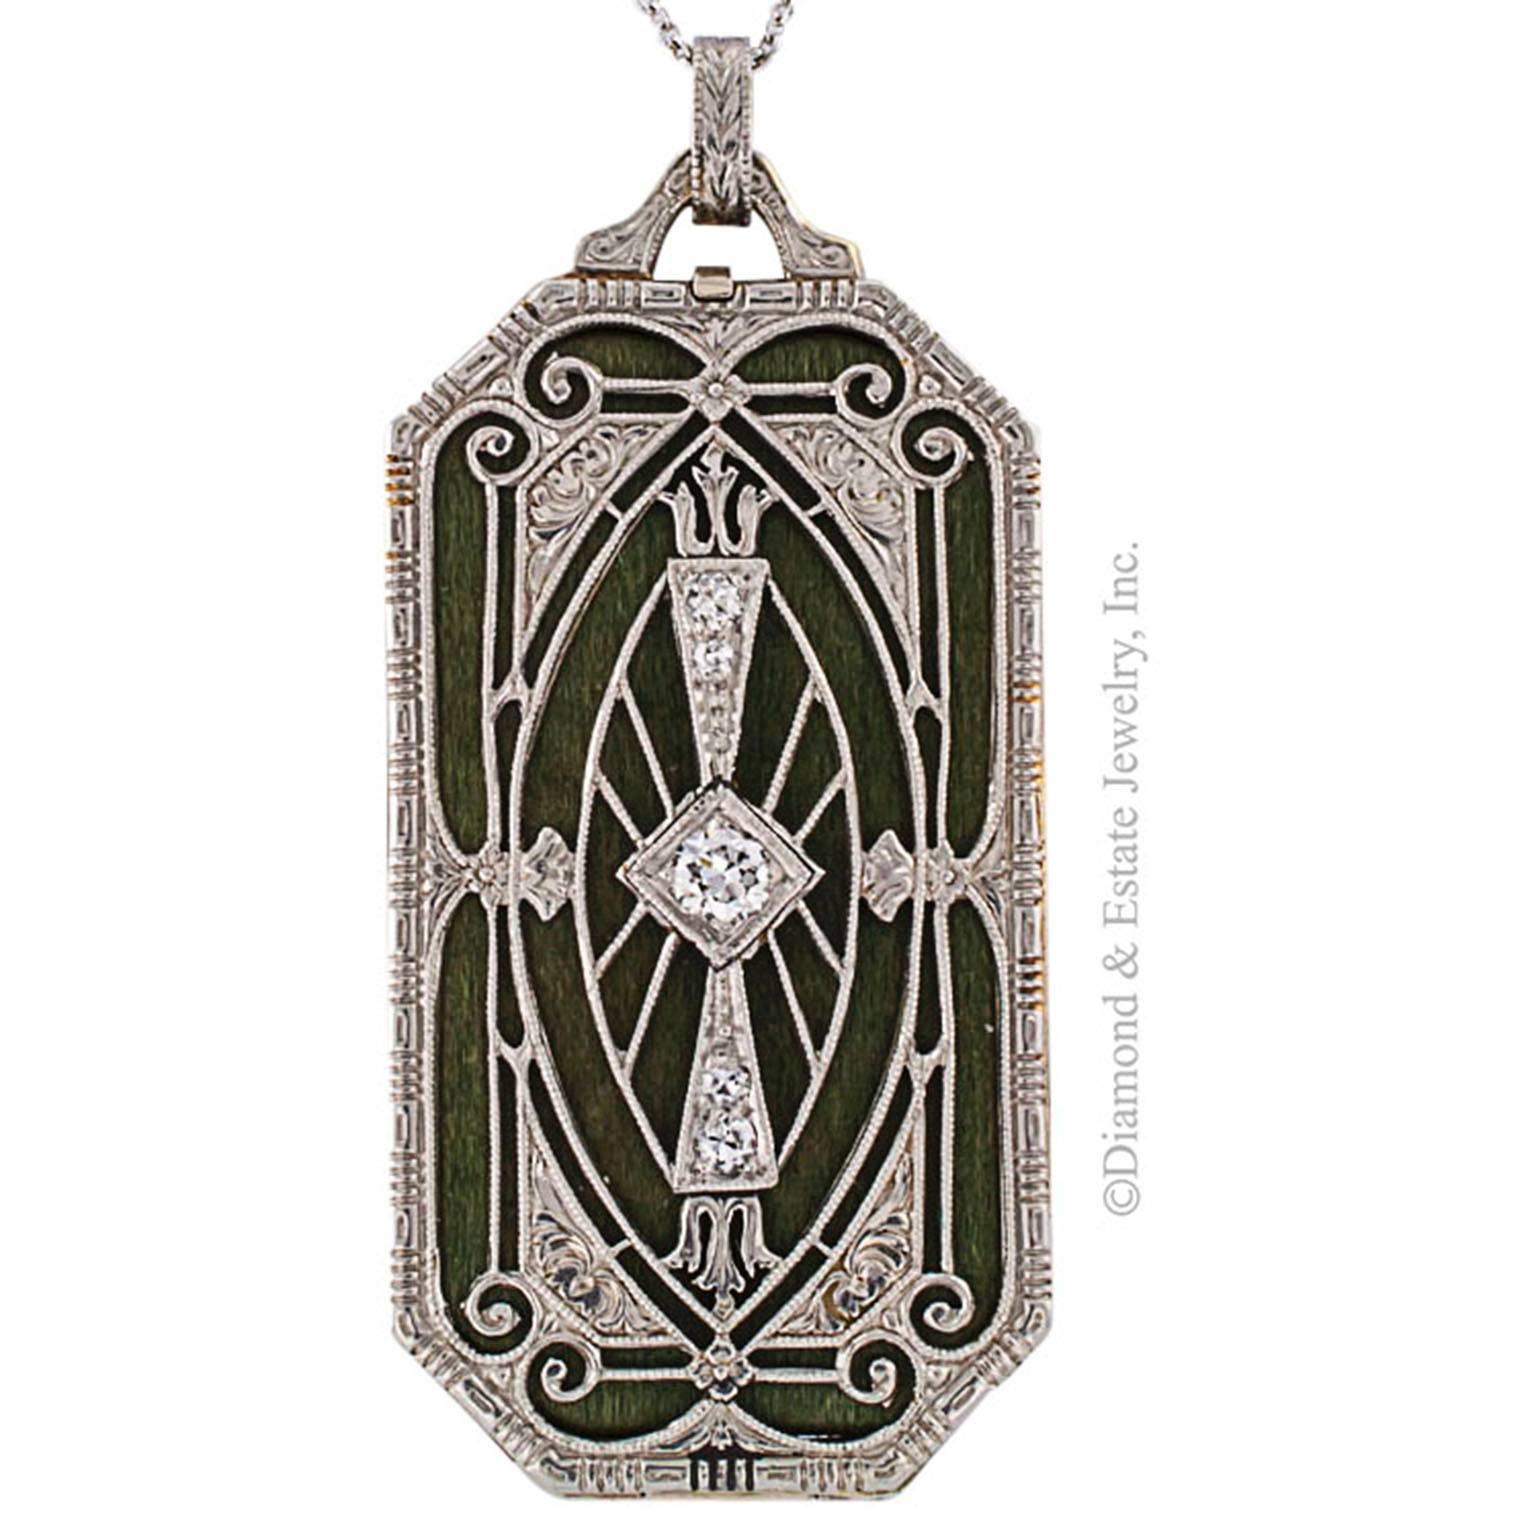 Art Deco Diamond Gold Platinum Vinaigrette Pendant

High craftsmanship that strikes the perfect note between beauty and uncommon functionality.  Rare and incredibly ornate, this magical jewel is captivating from every angle.  The platinum topped,